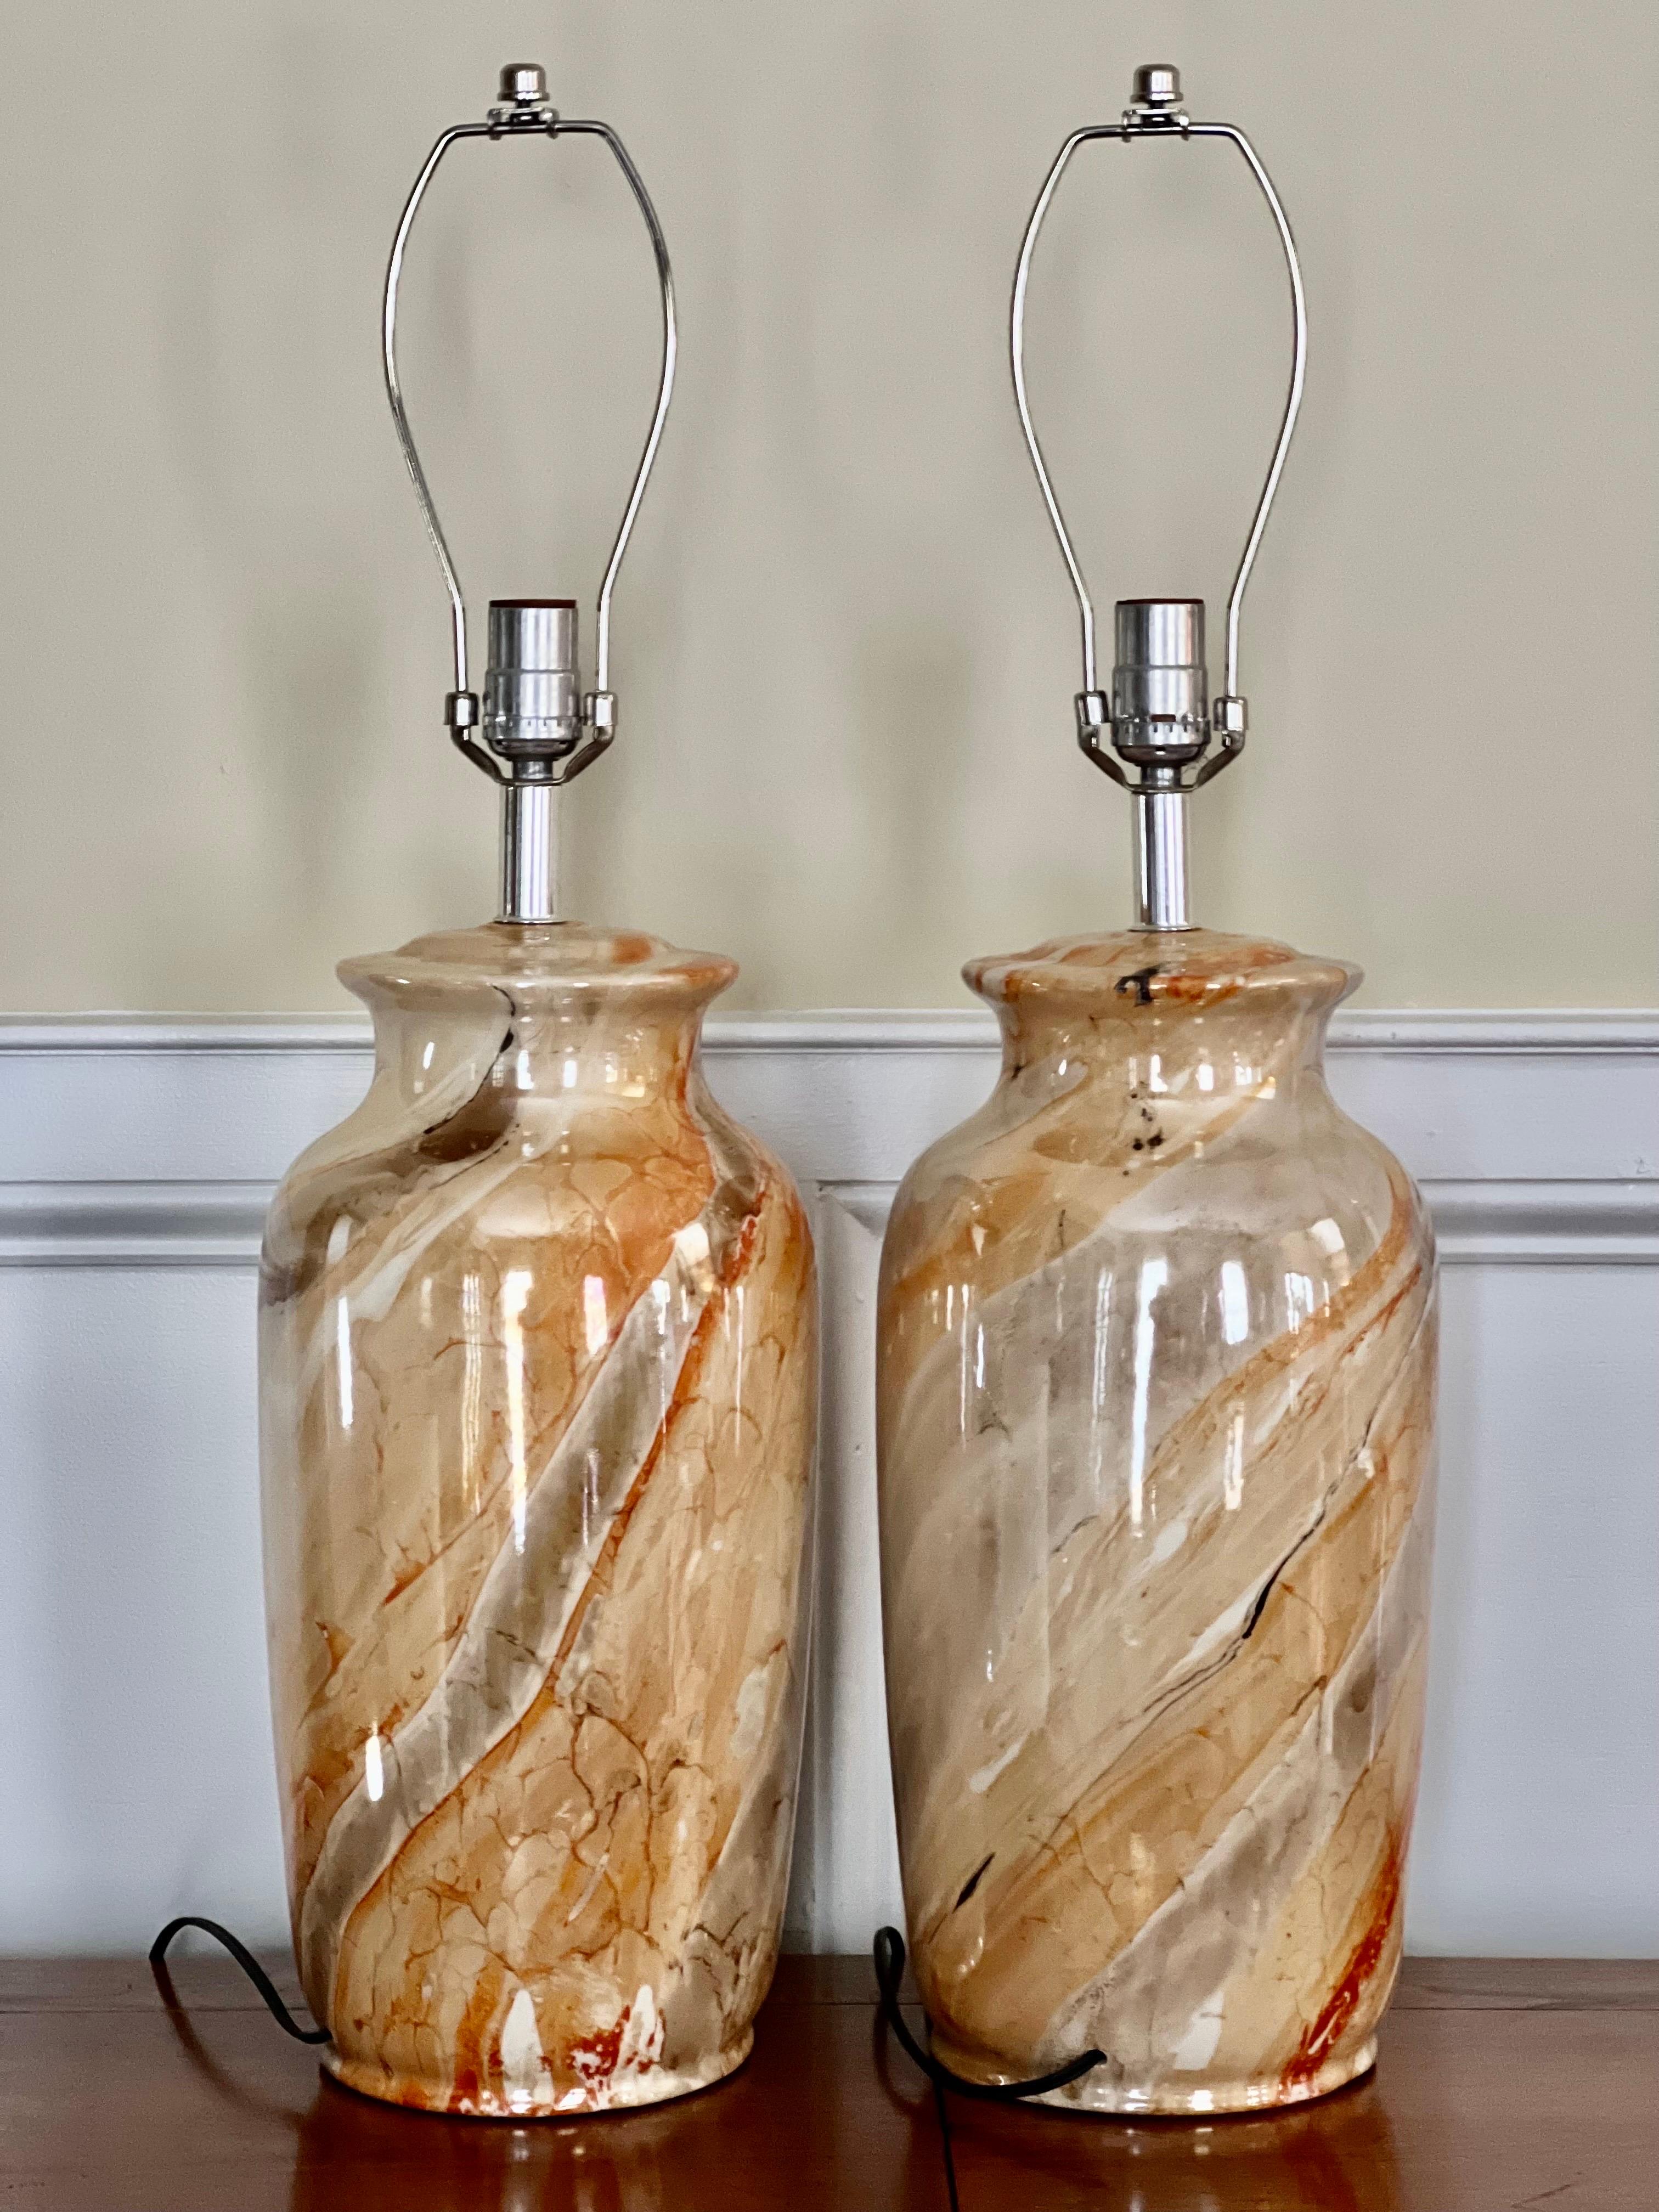 Beautiful pair of vintage faux marbleized glazed ceramic table lamps.

The finish is a lustrous high gloss glaze in neutral, muted earth tones of gray, cream, tan and auburn with a touch of  black.  The marble design is gorgeous and the pair is in